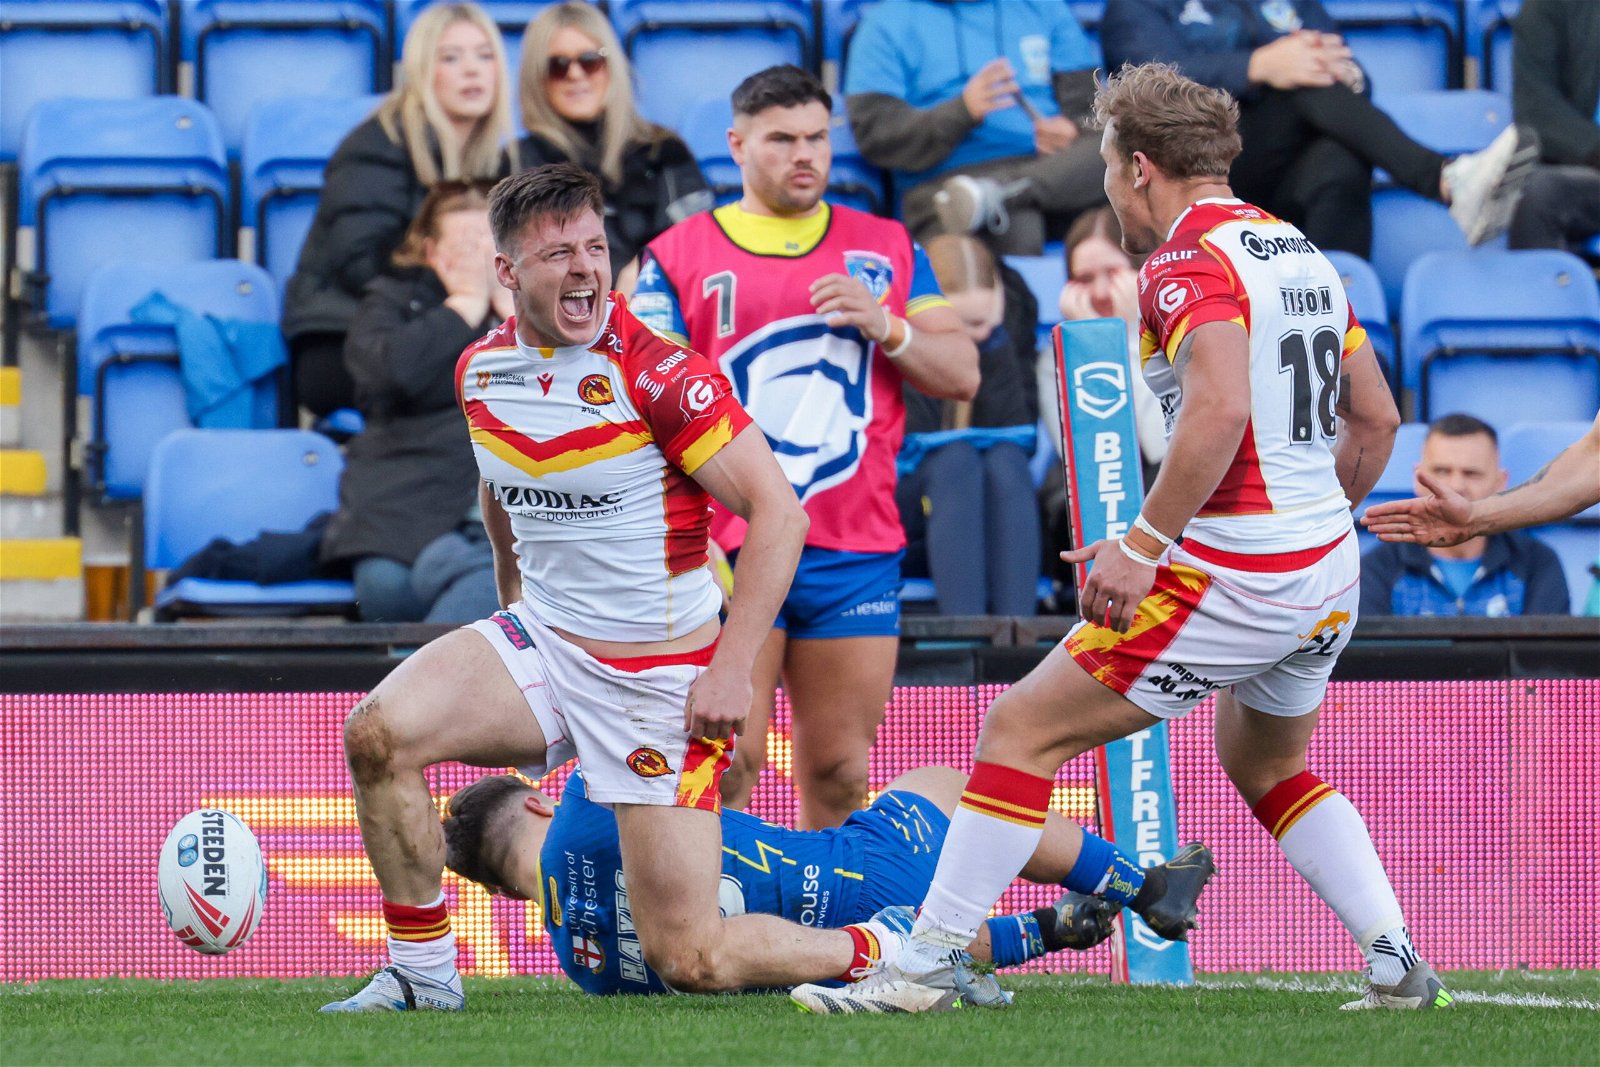 Catalans Dragons winger Tom Davies with Ugo Tison celebrates scoring in the corner against Warrington Wolves in the Super League.